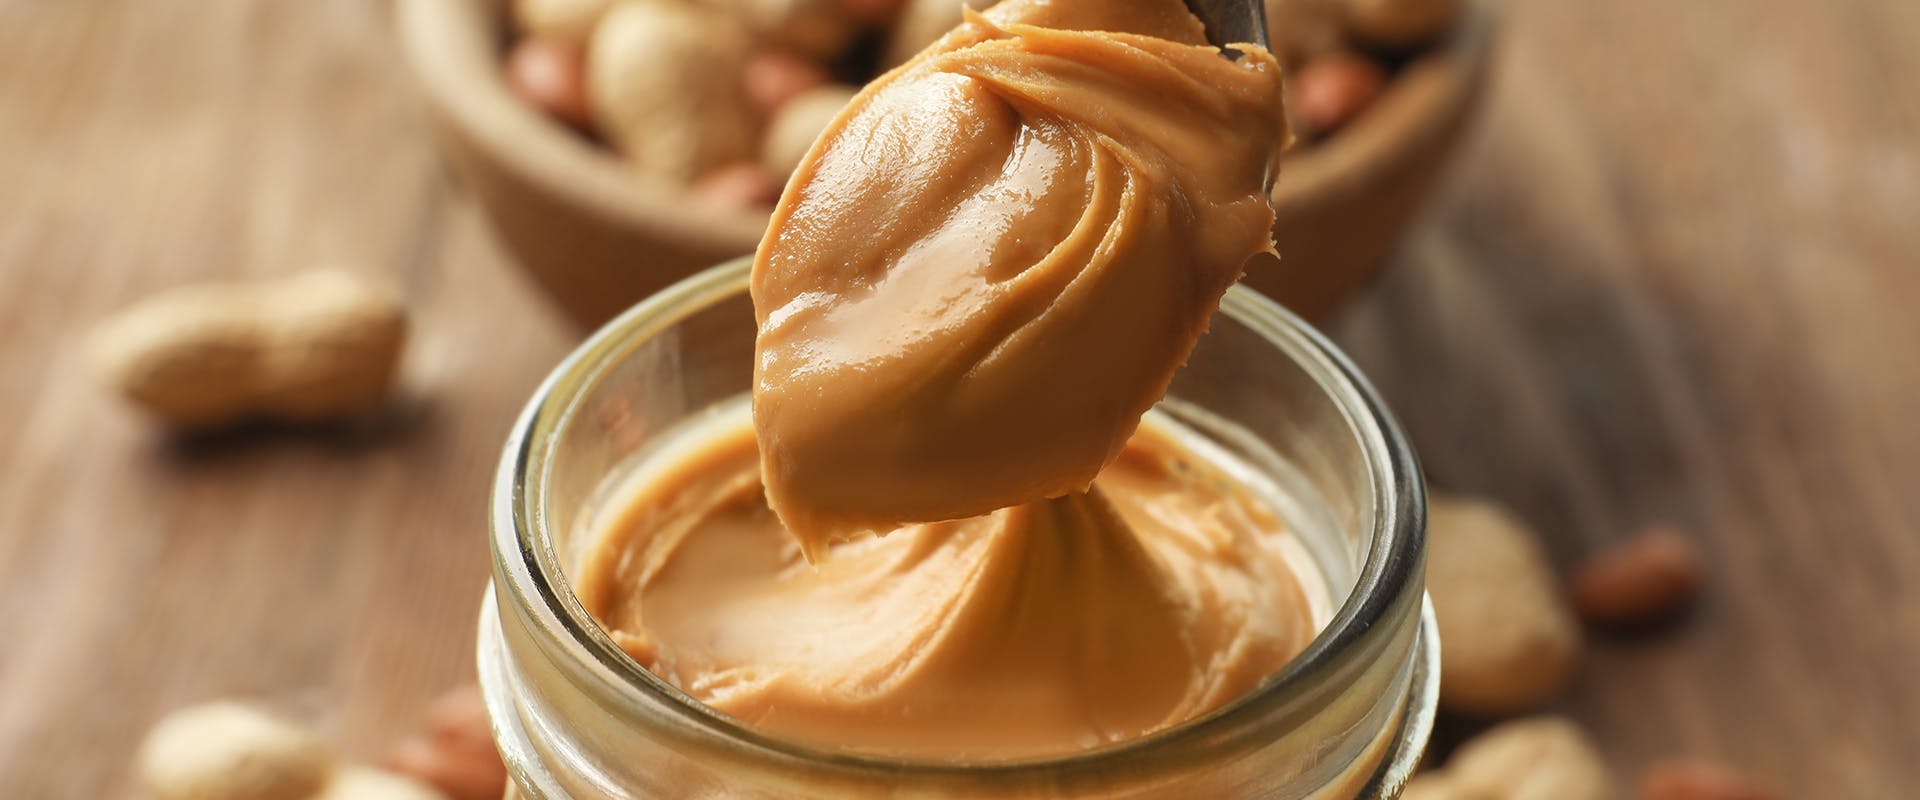 A spoonful of peanut butter from a jar